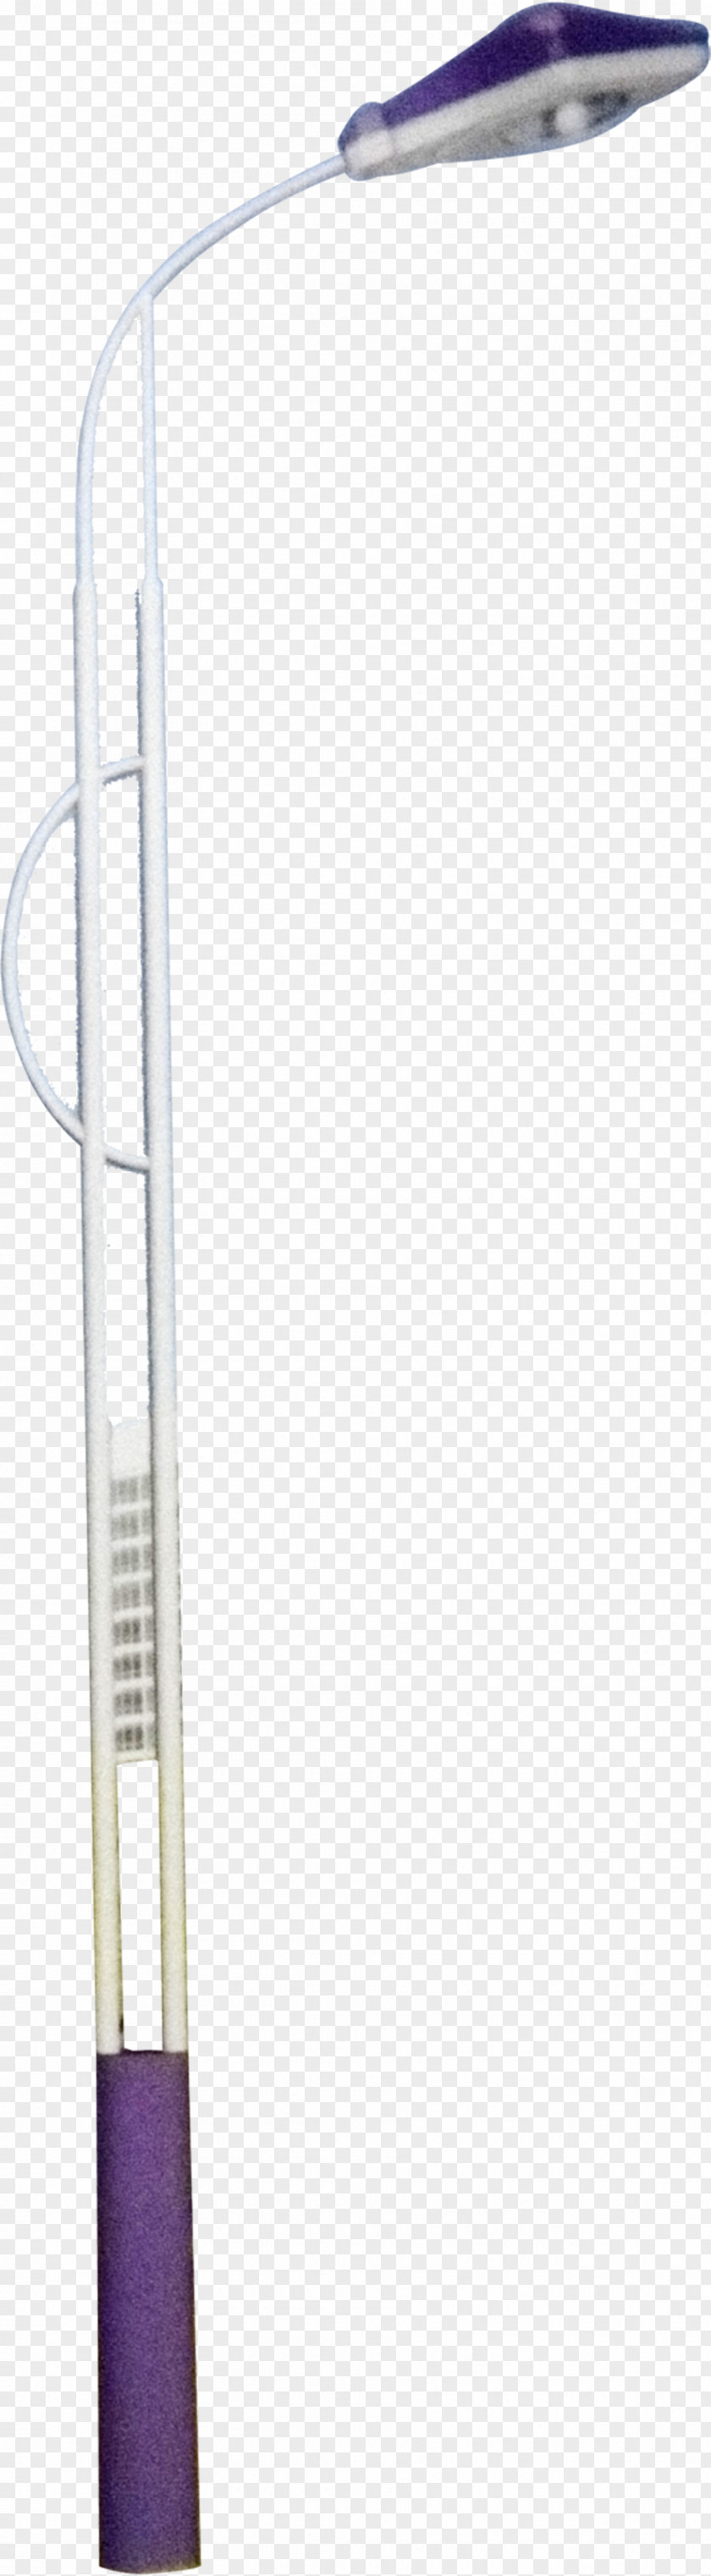 European-style Street Light Pole Texture Modeling Renderings Lamp Icon PNG